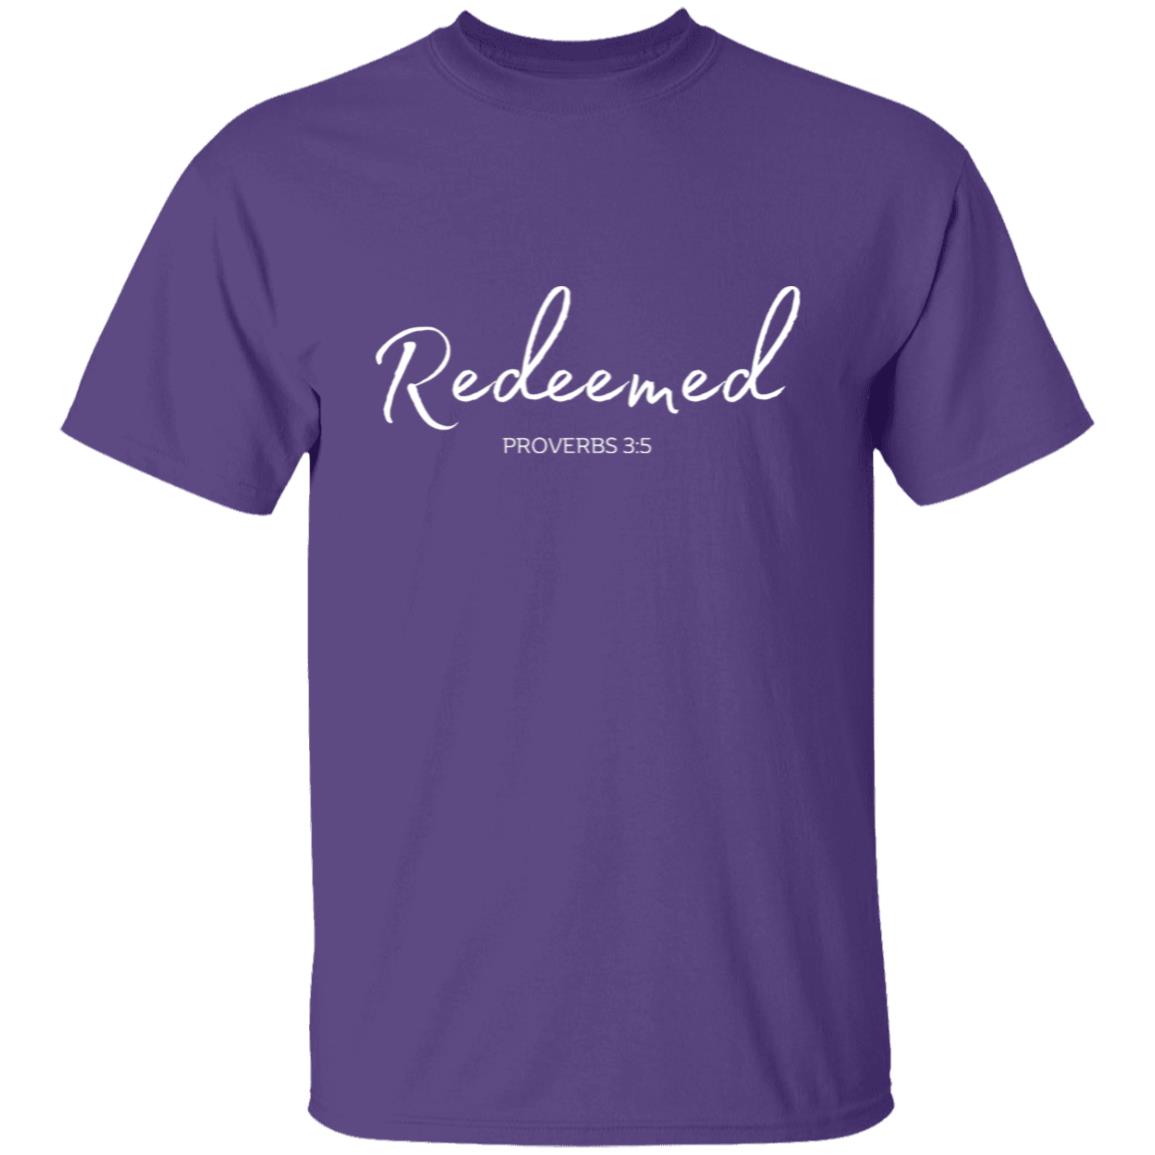 Get trendy with Redeemed white text Redeemed (proverbs 3:5) T-Shirt Words of Faith Series (White Text) - T-Shirts available at Good Gift Company. Grab yours for $21.95 today!